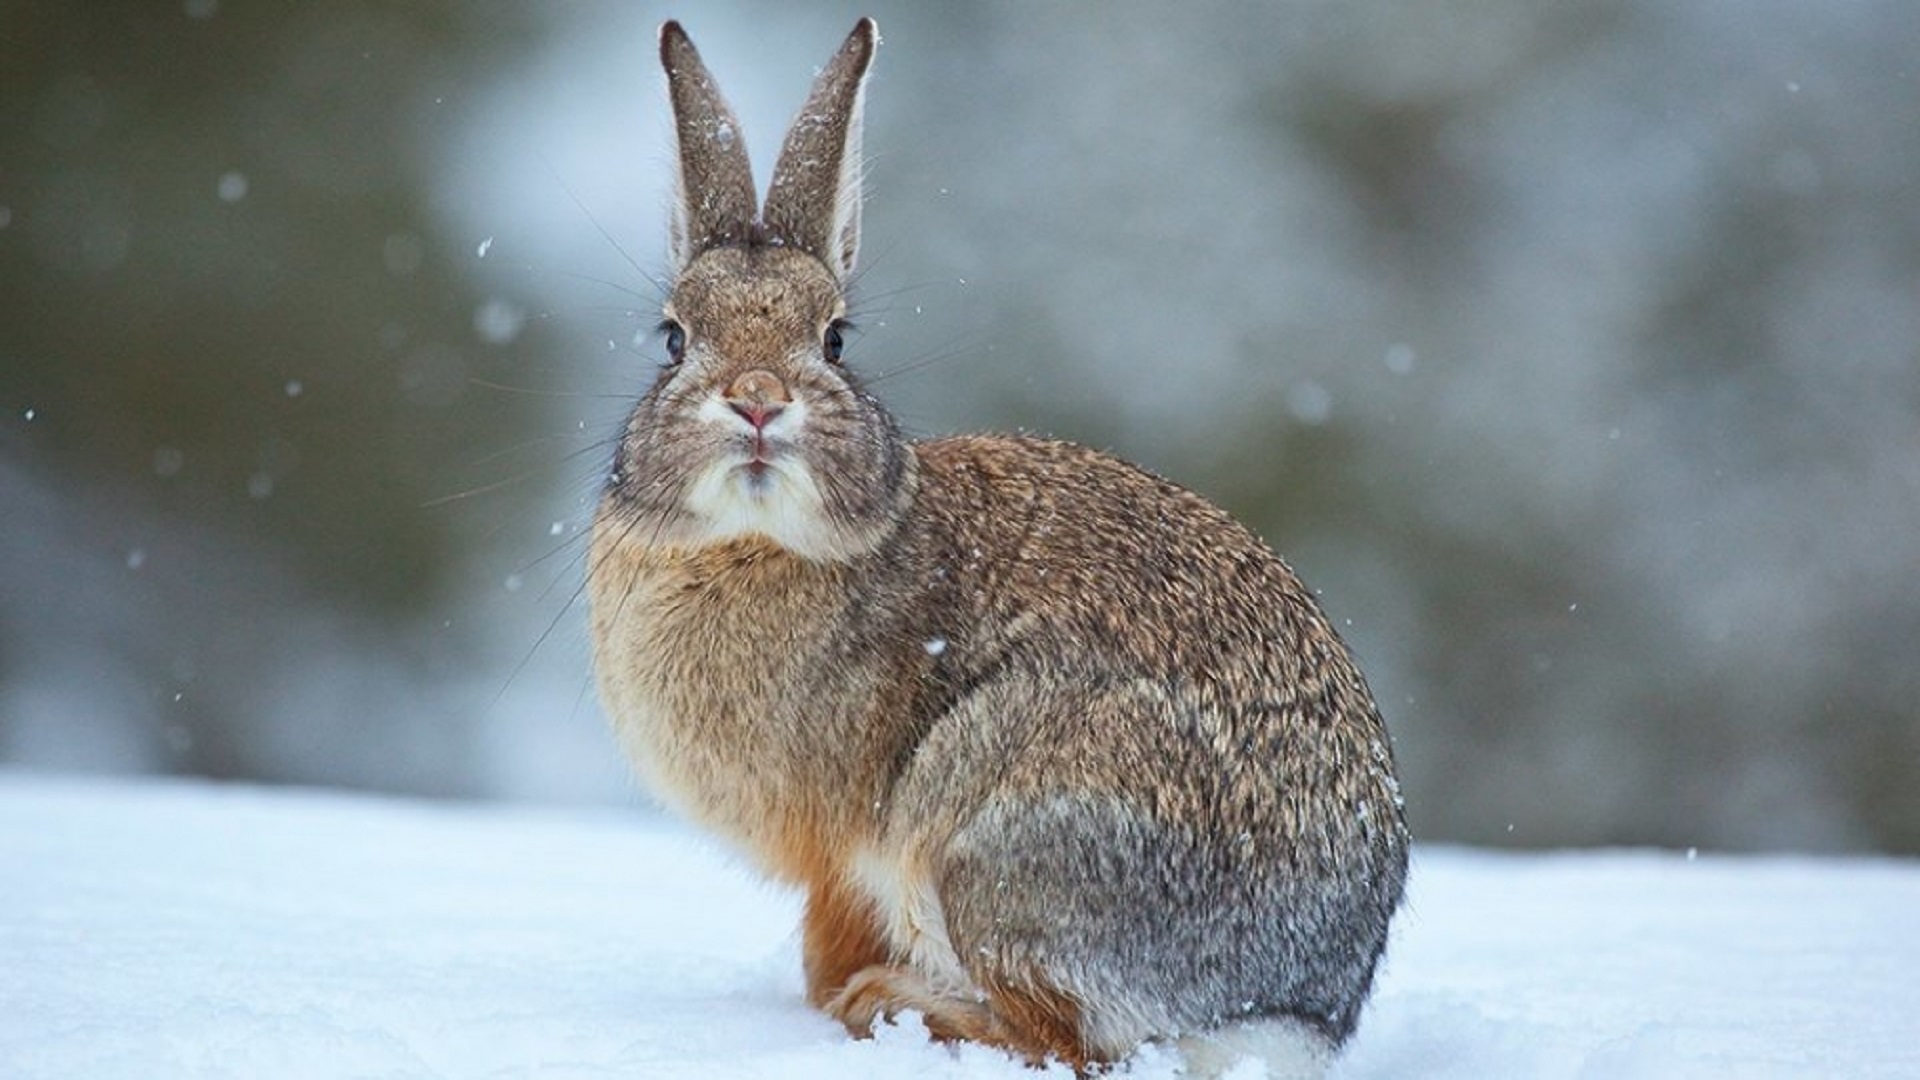 What's up, doc? How rabbits endure harsh winters